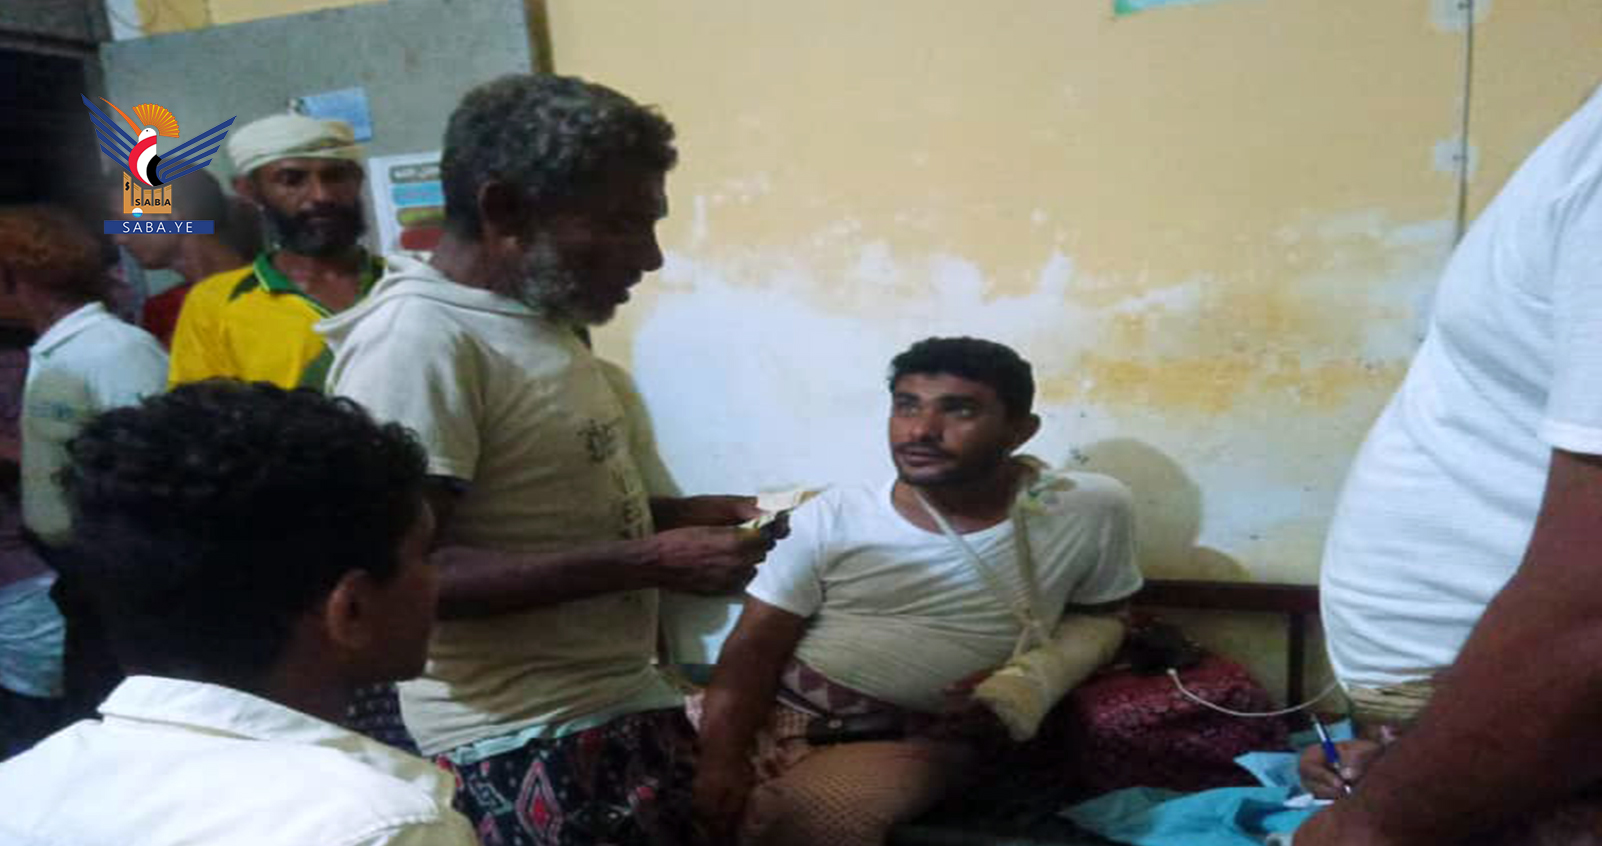 50 Yemeni fishermen returned after being detained by Eritrean authorities